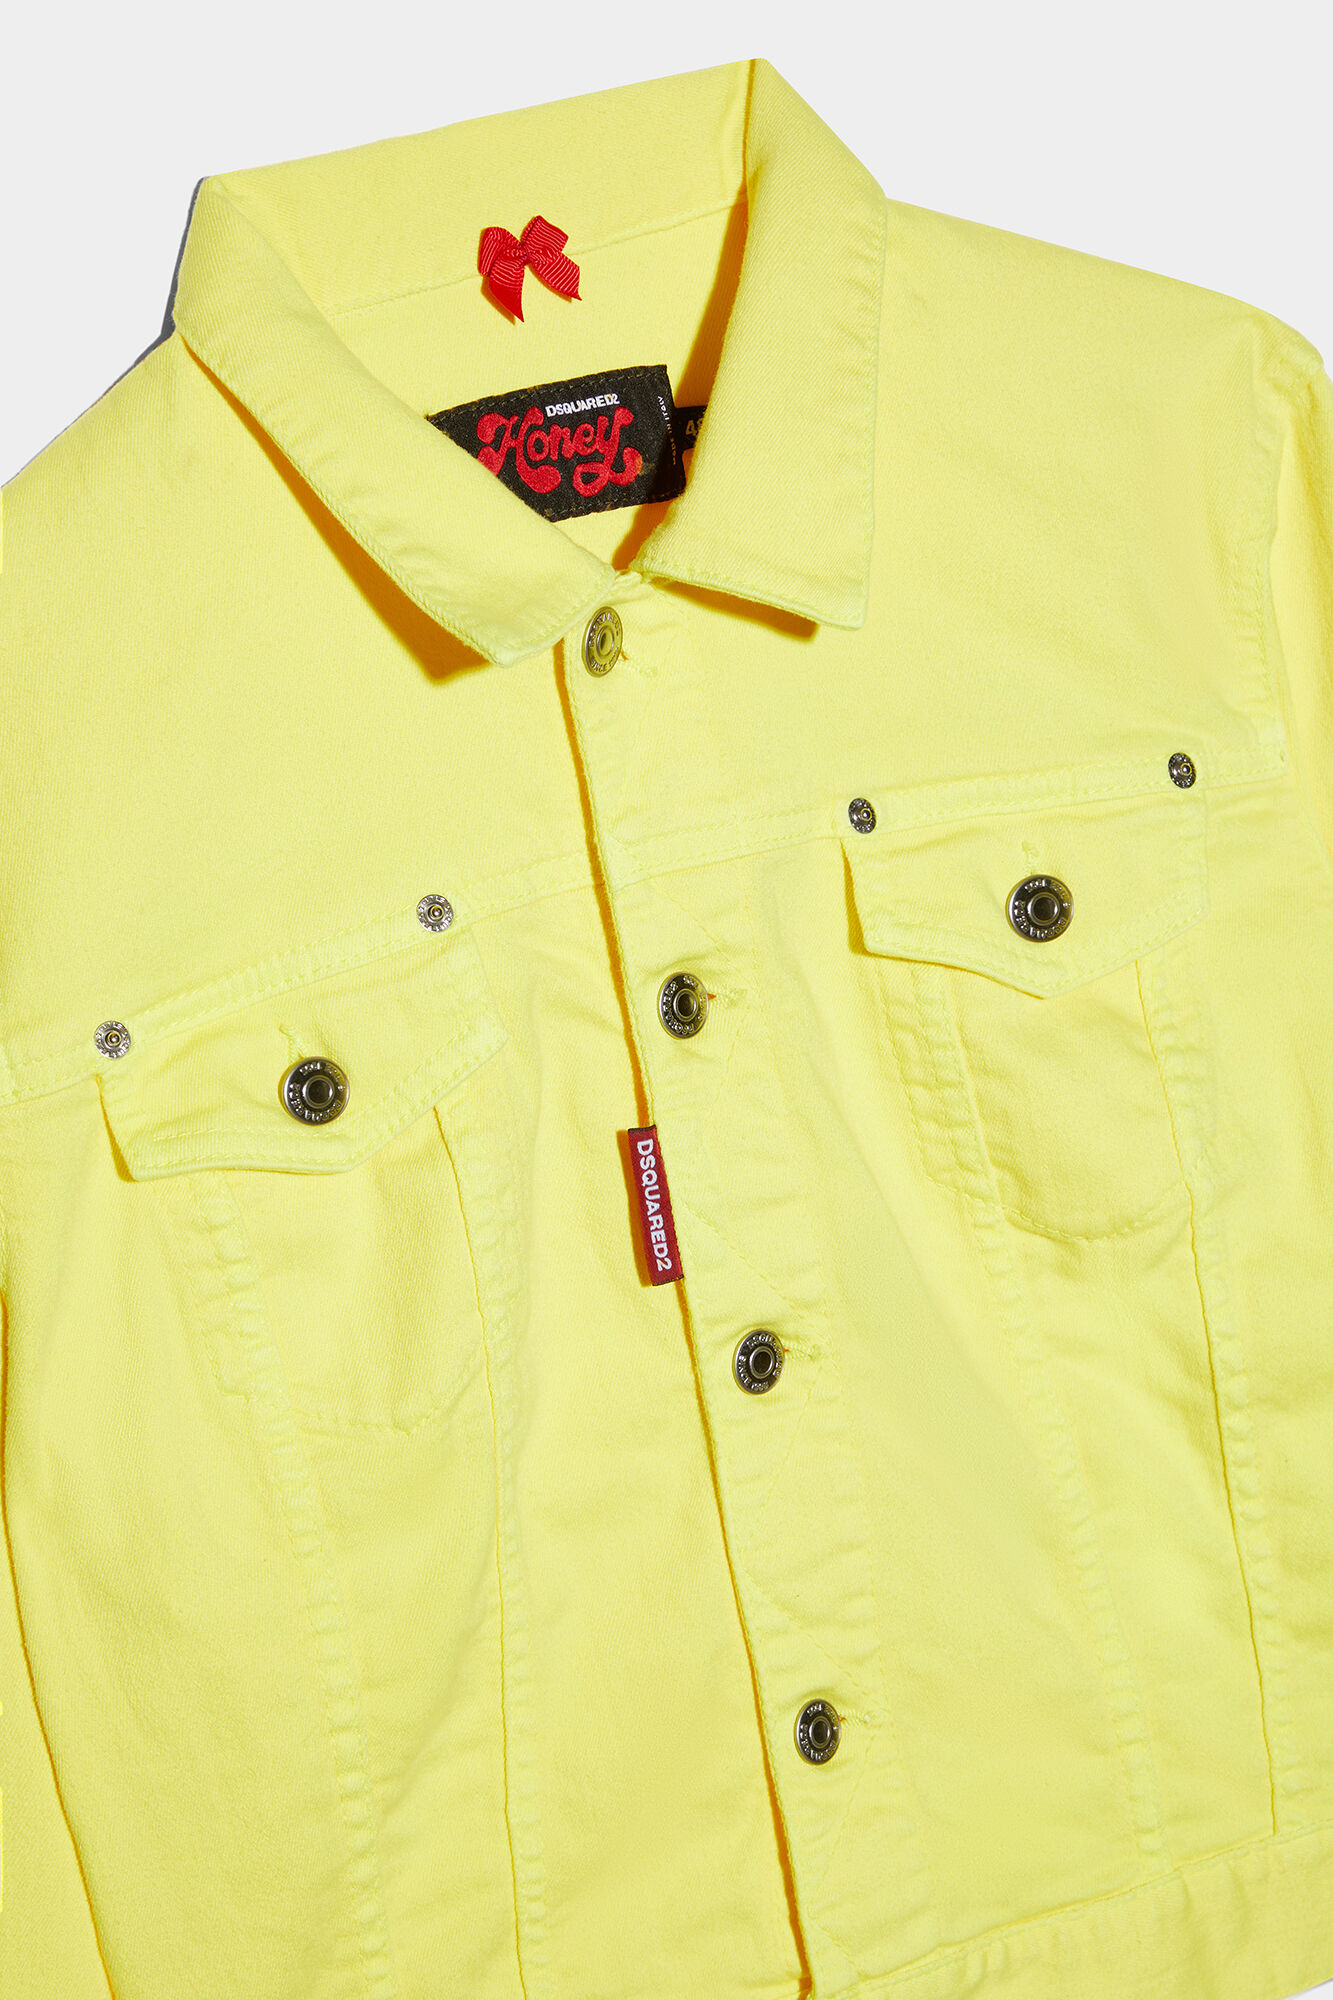 Buy 21 Inside premium Cotton Denim Jacket For Men's Size M Color yellow at  Amazon.in